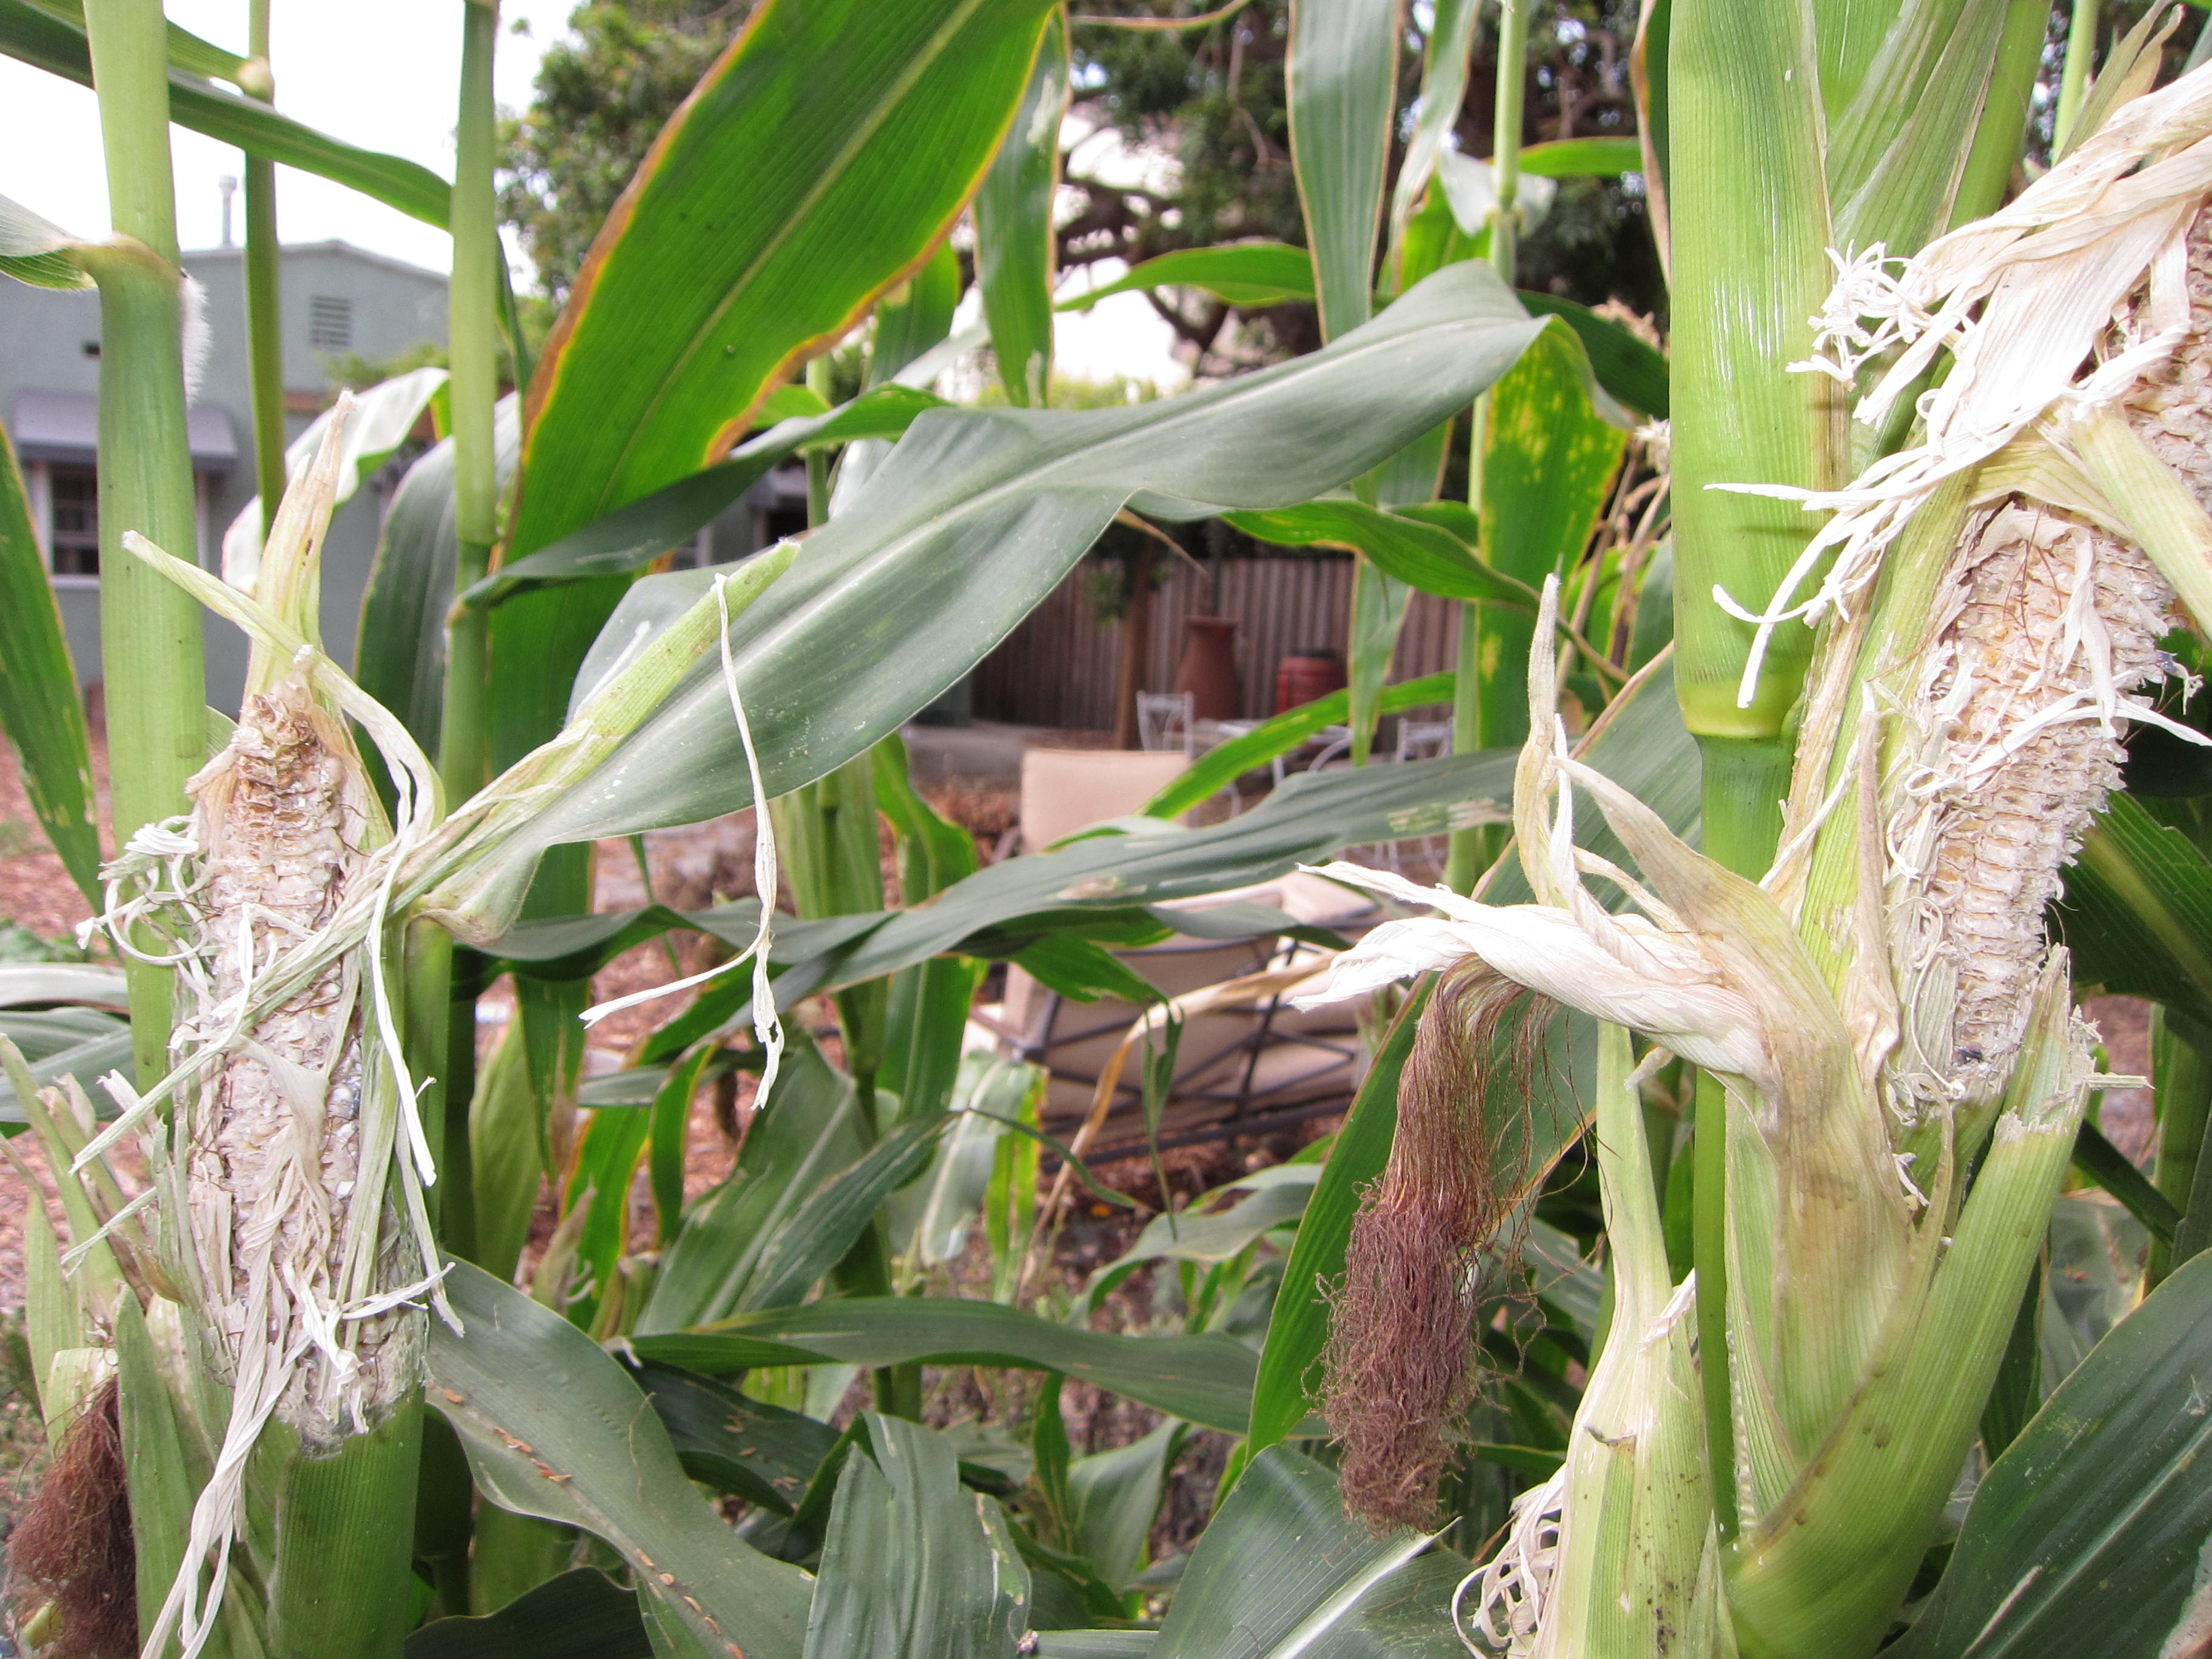 Rats attack our corn with a vengeance.